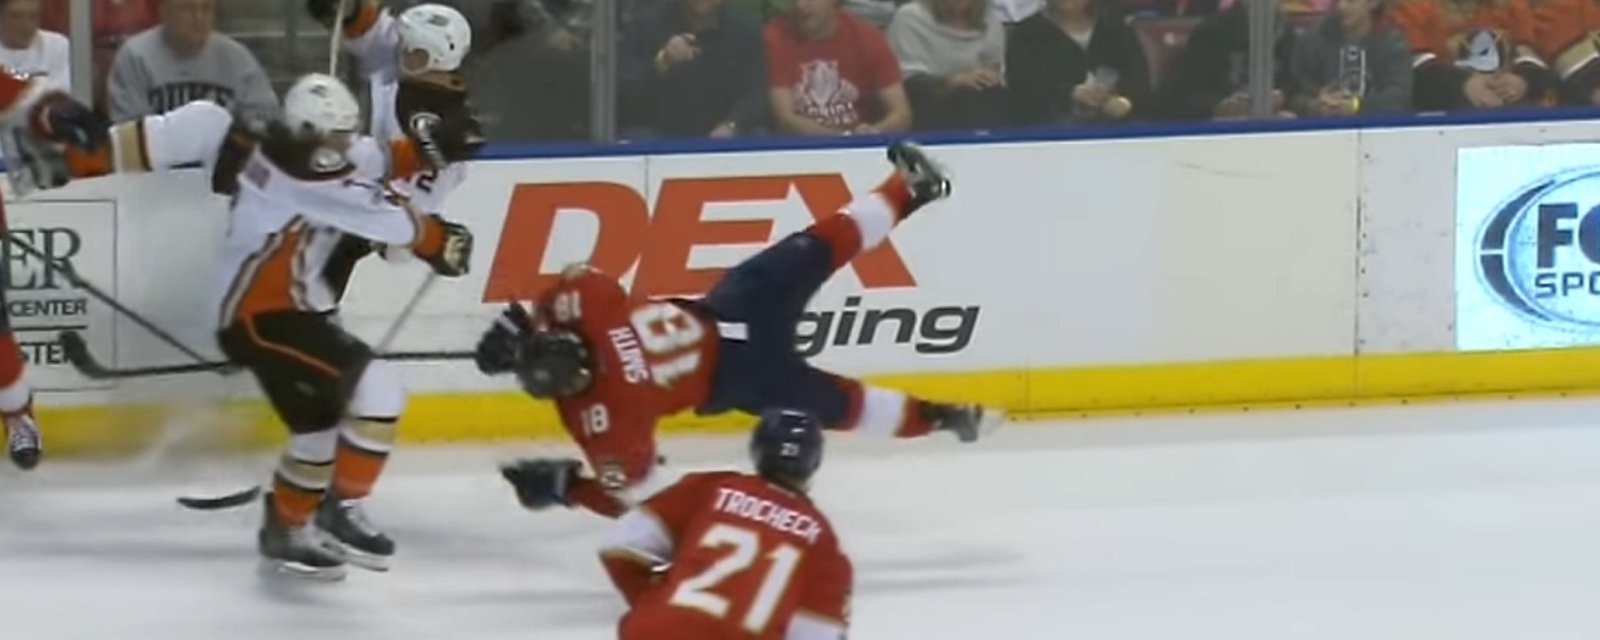 Reilly Smith bounces right back up after taking a monster hit to the head.